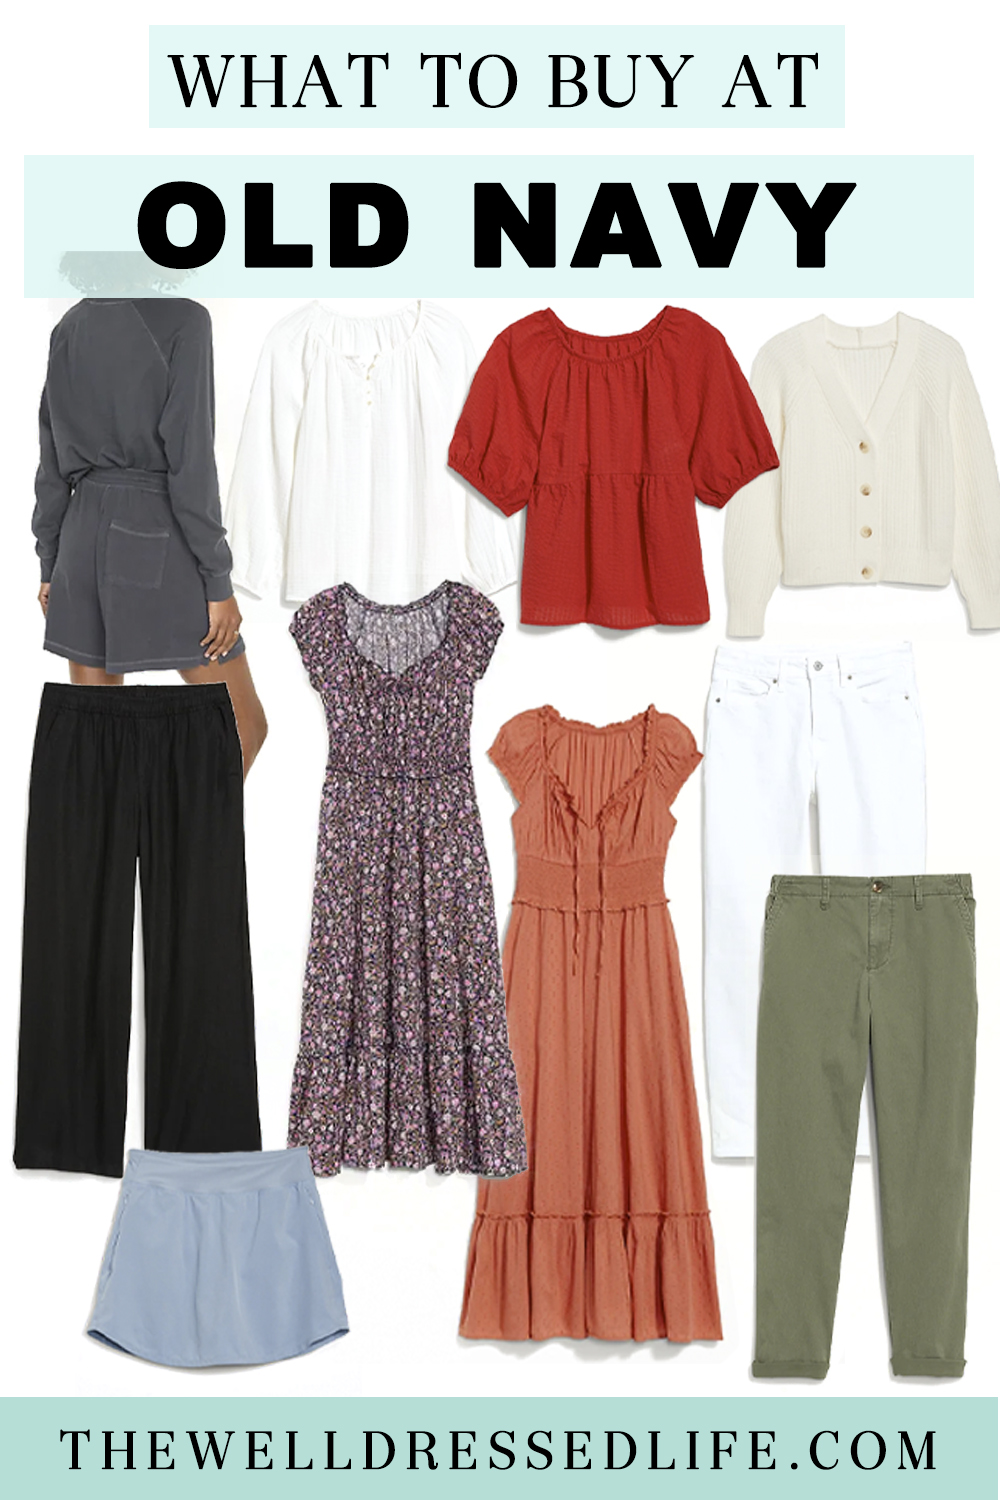 What to Buy at Old Navy